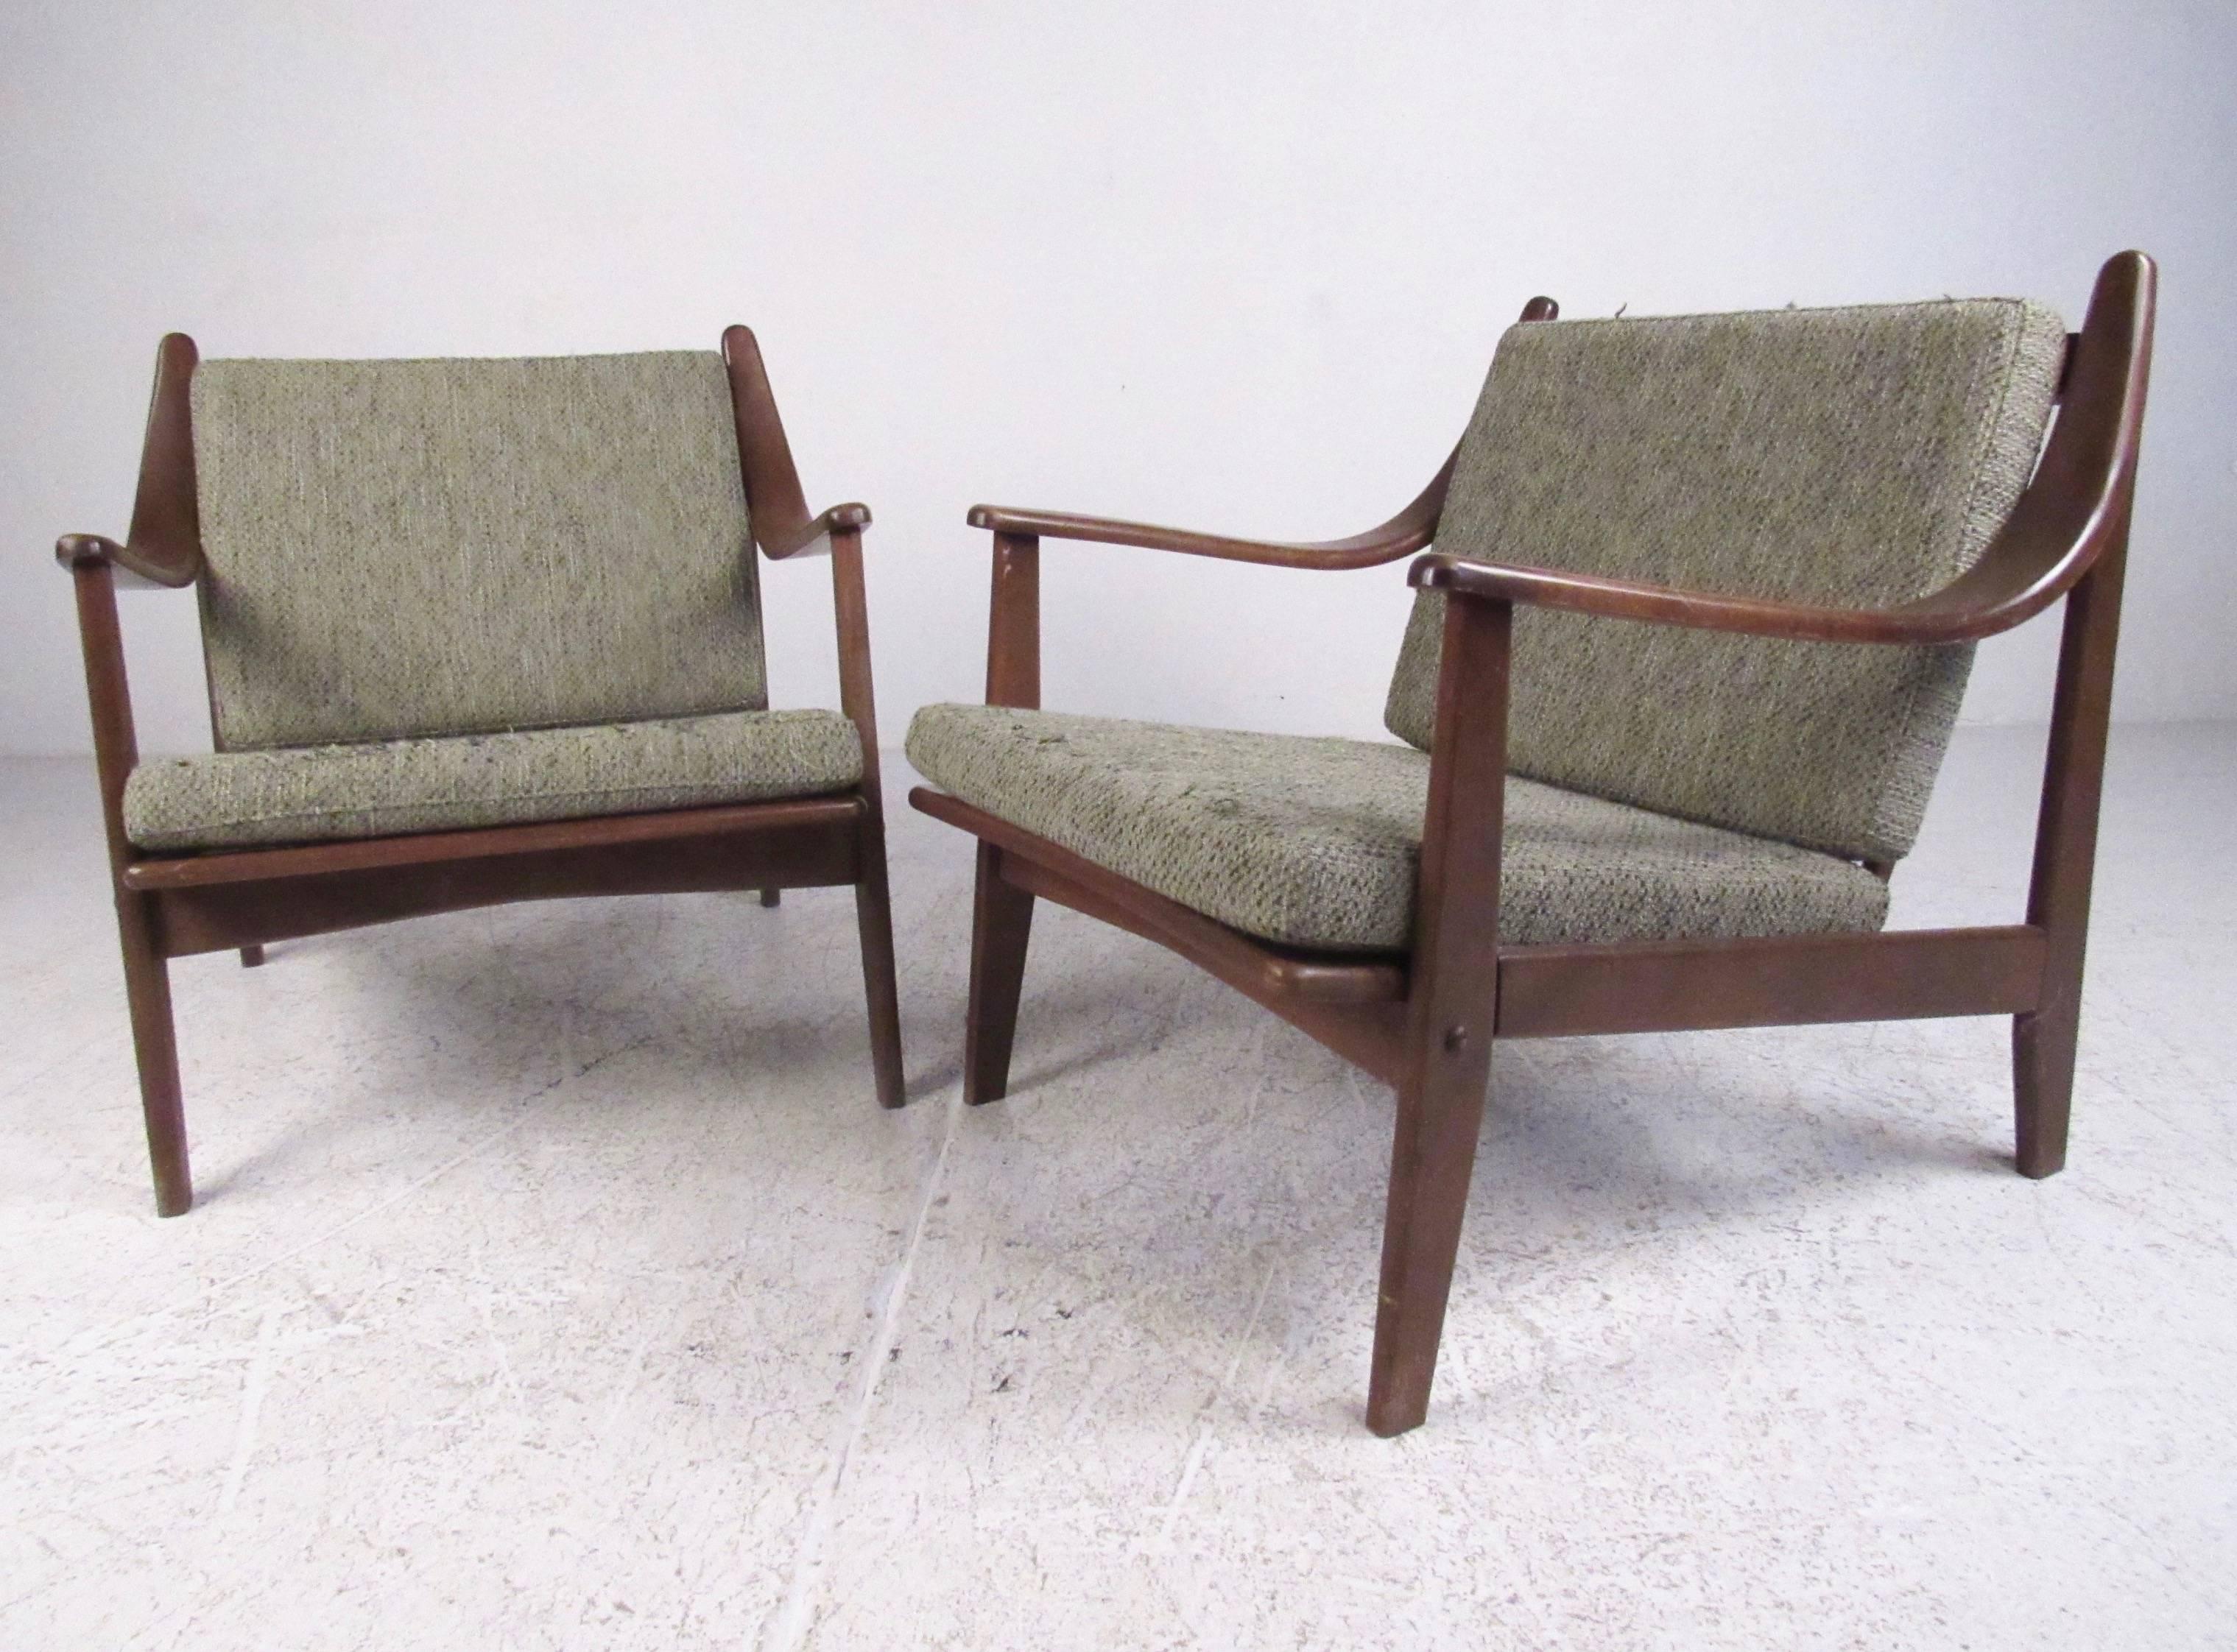 This stylish pair of Mid-Century Modern lounge chairs feature sculpted walnut construction with comfortable vintage upholstery. Spingle backs and unique sloped arm rests add to the Danish modern Finn Juhl style of the pair. Please confirm item